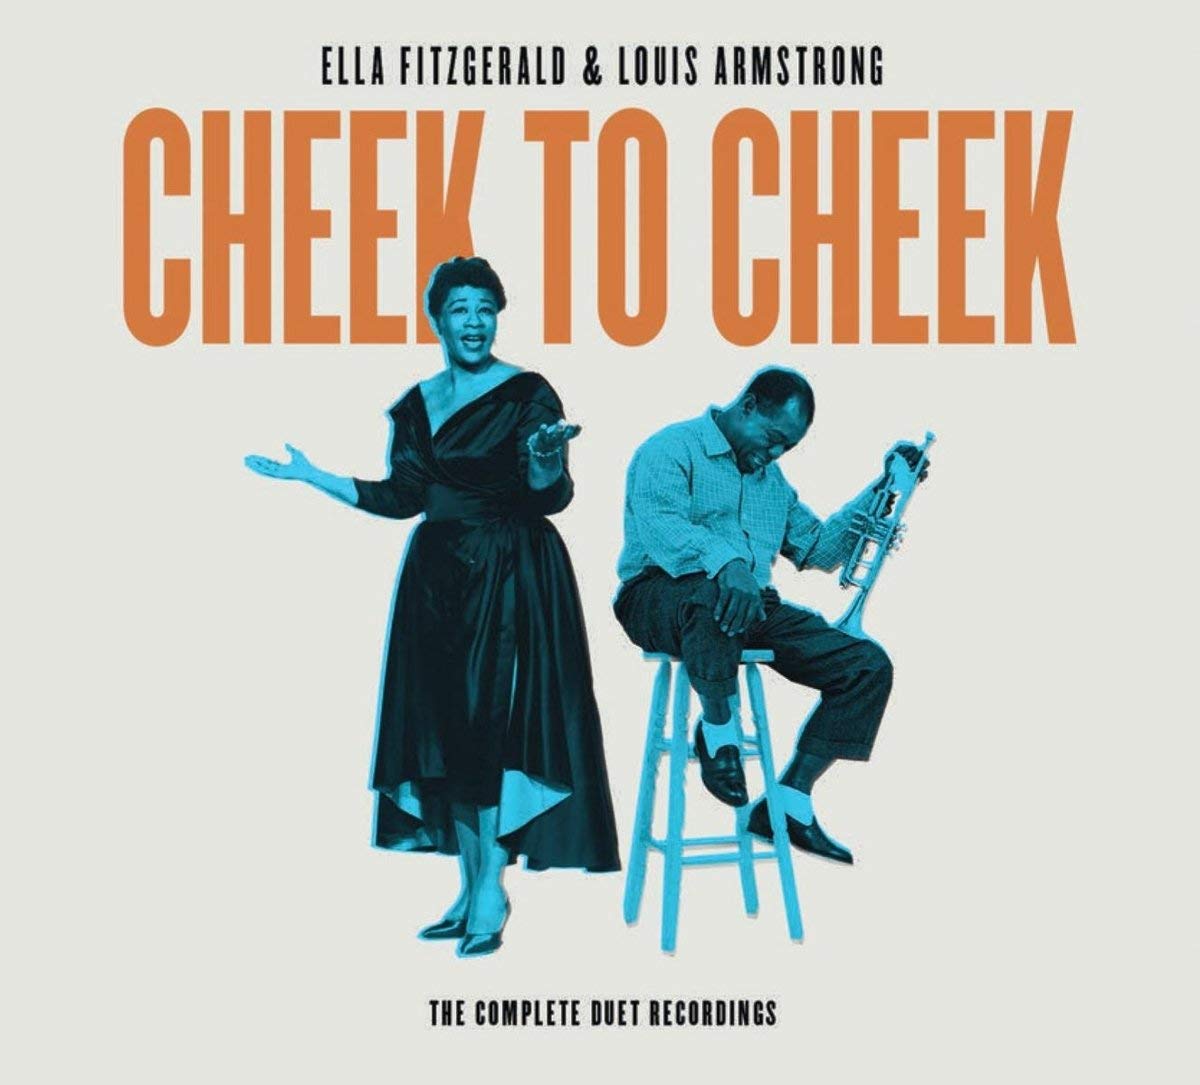 CHEEK TO CHEEK: THE COMPLETE DUET RECORDINGS